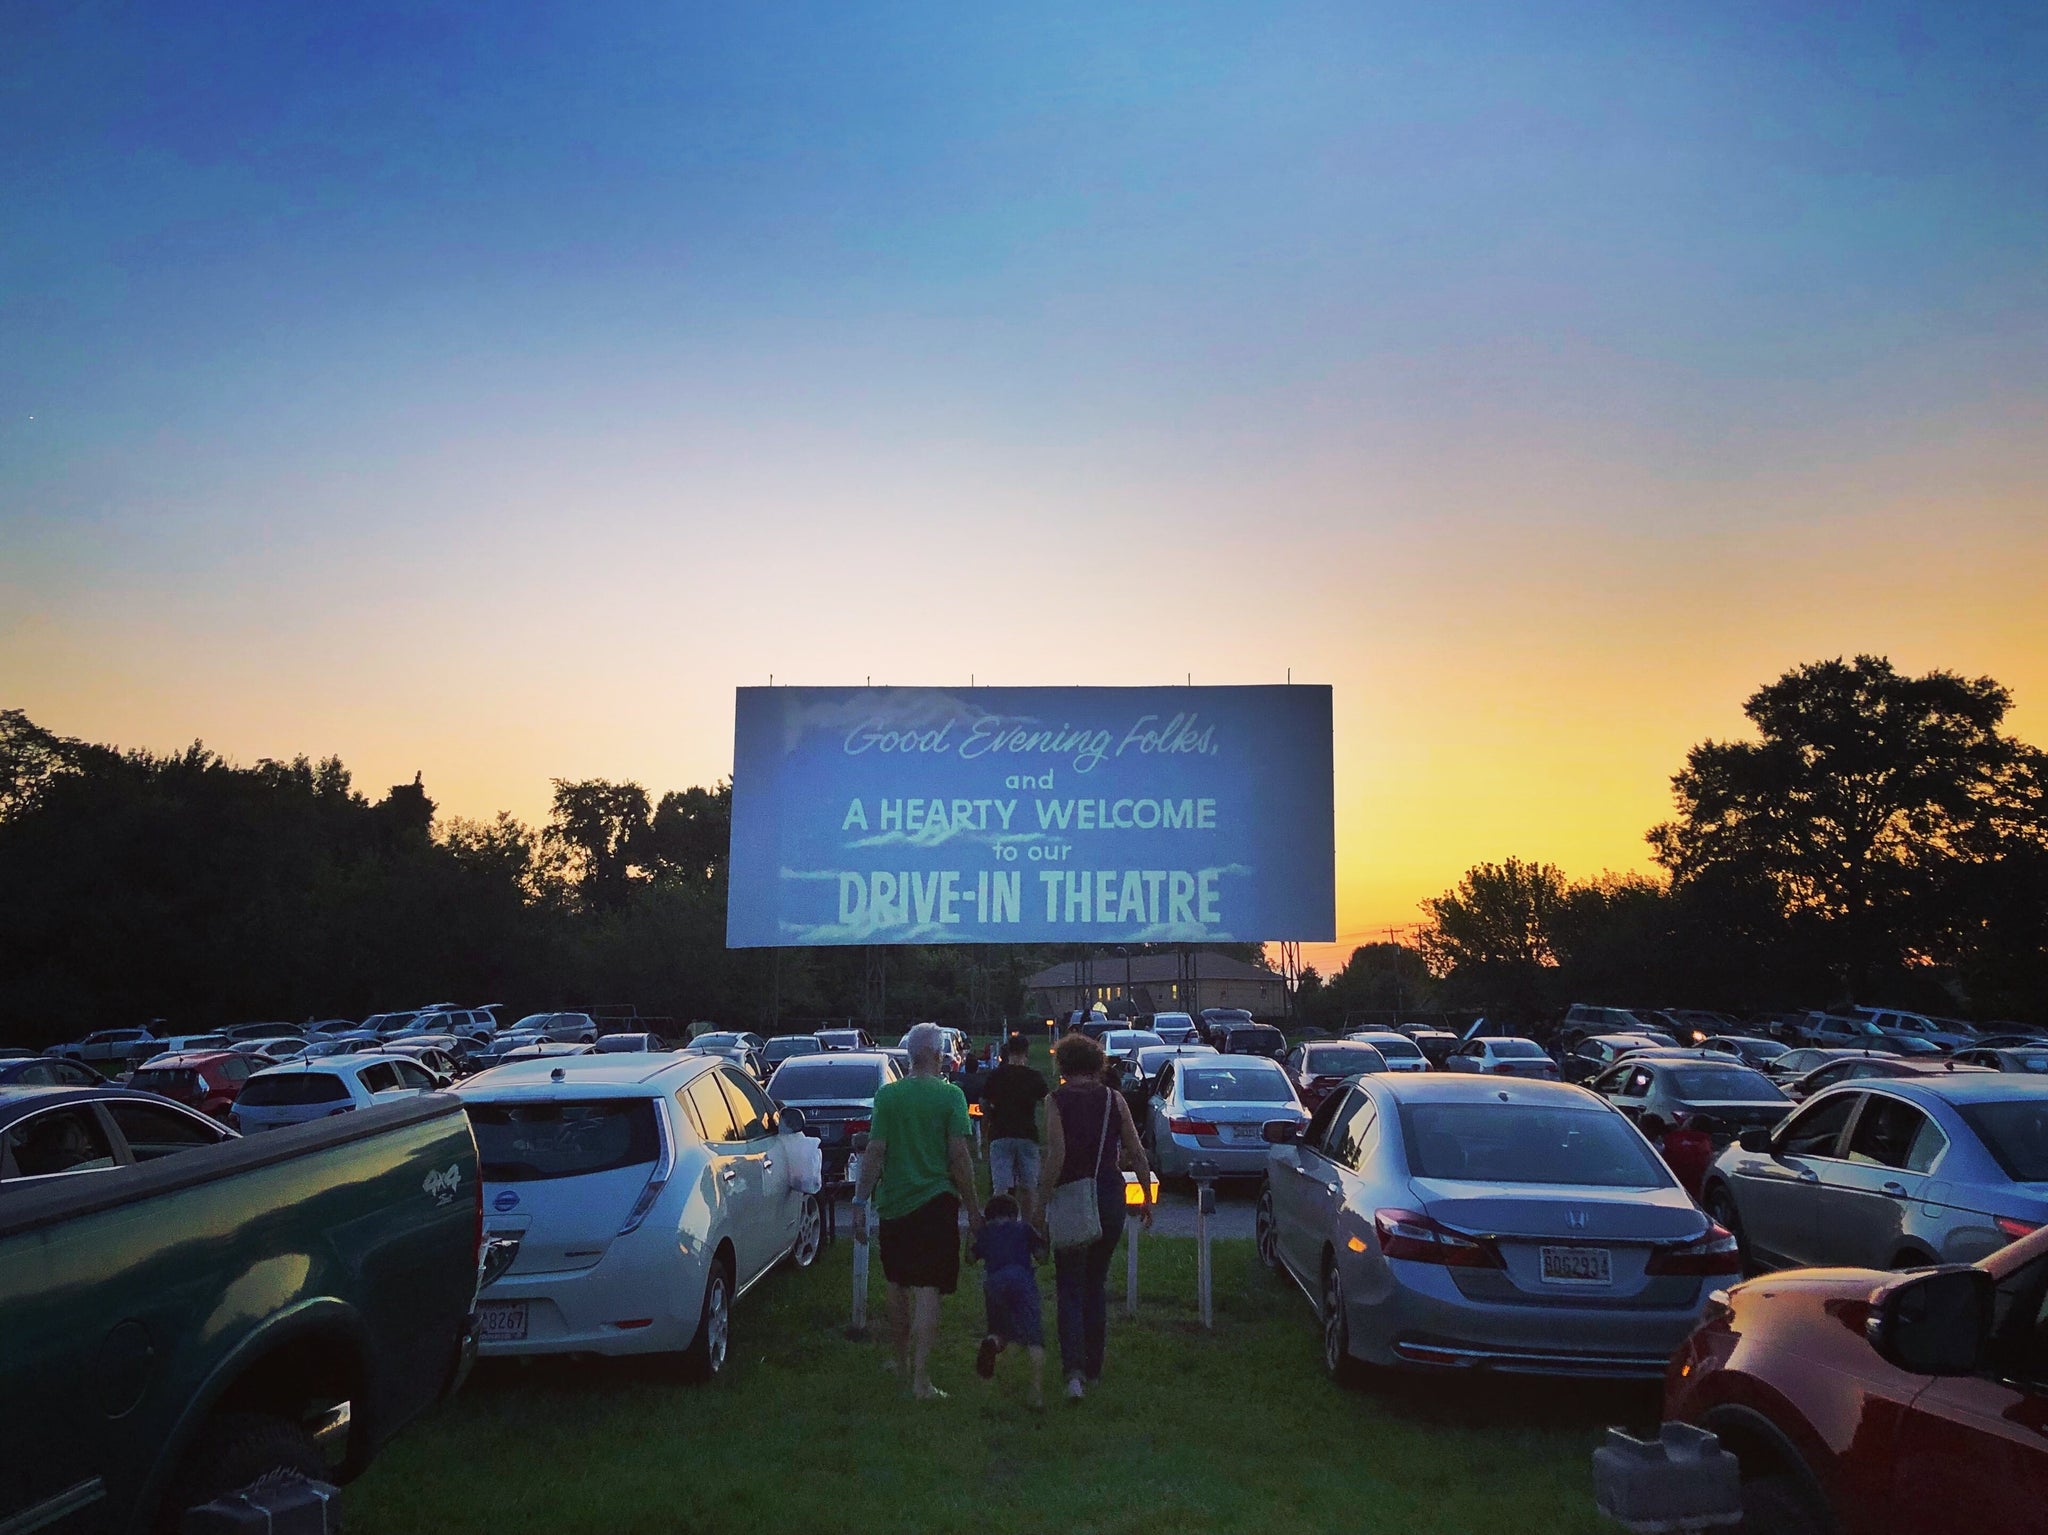 Relive Nostalgia: An Evening at a Drive-in Theater